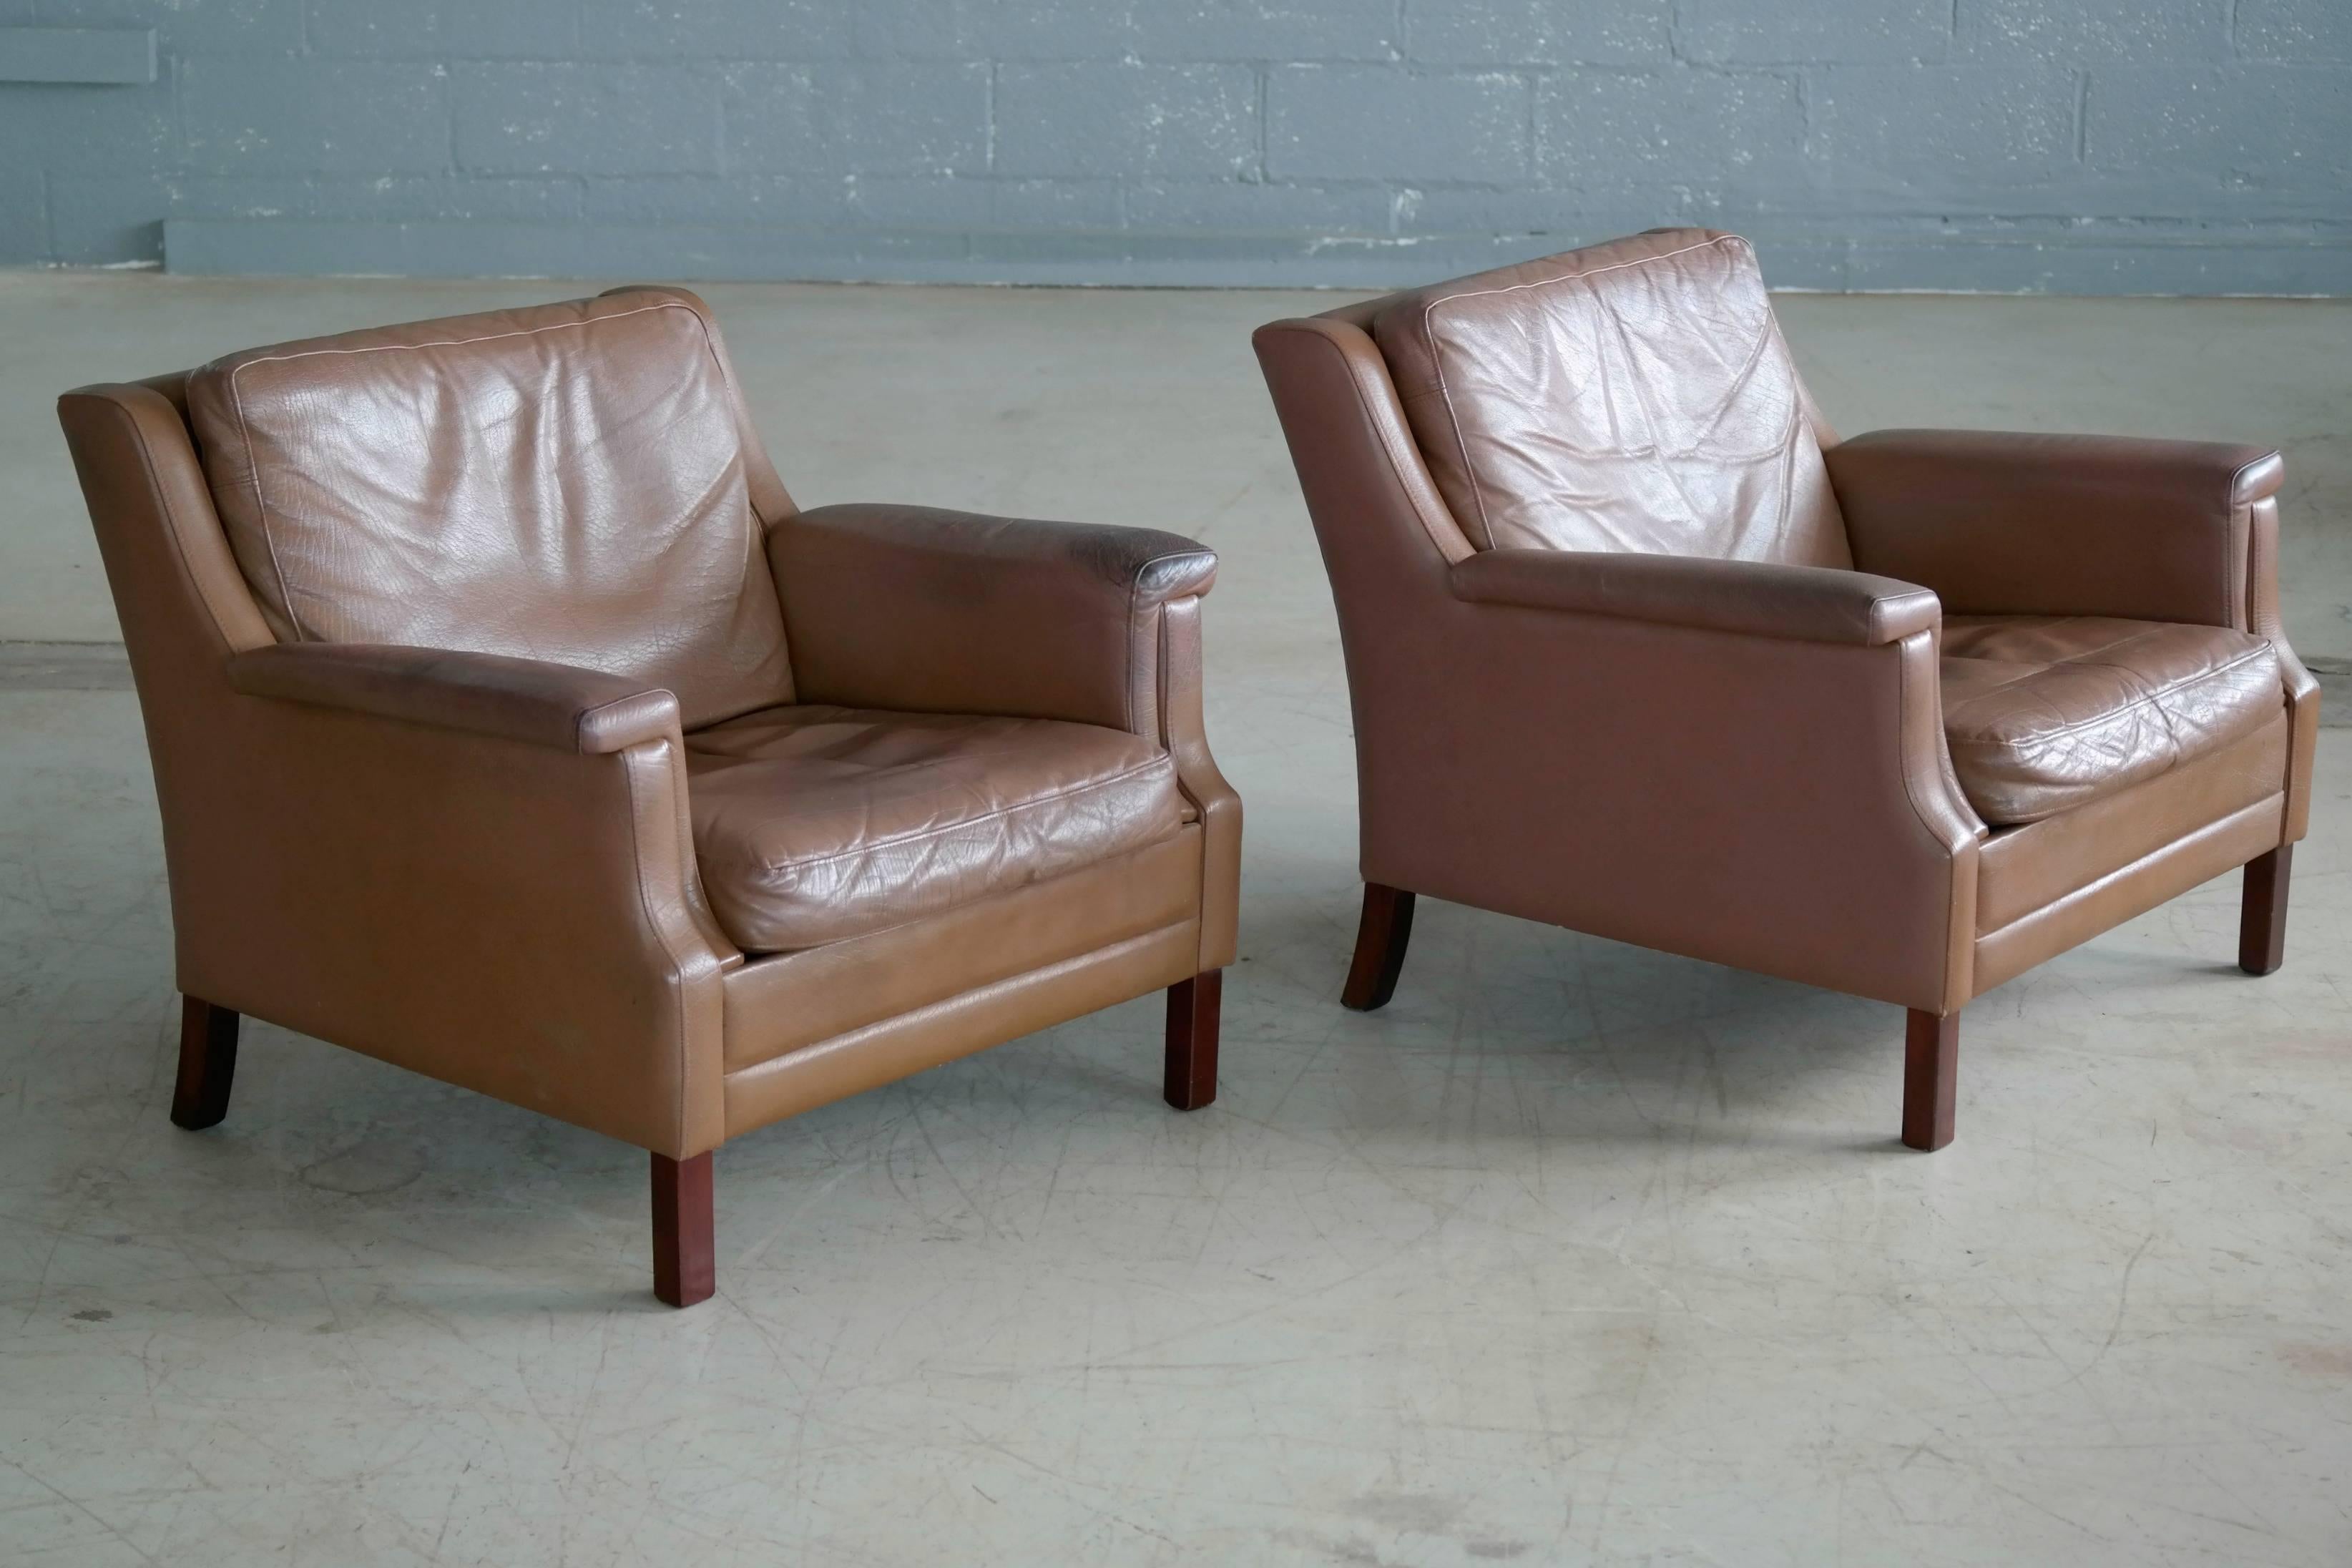 Mid-20th Century Pair of Danish Borge Mogensen Style Midcentury Easy Chairs in Brown Leather